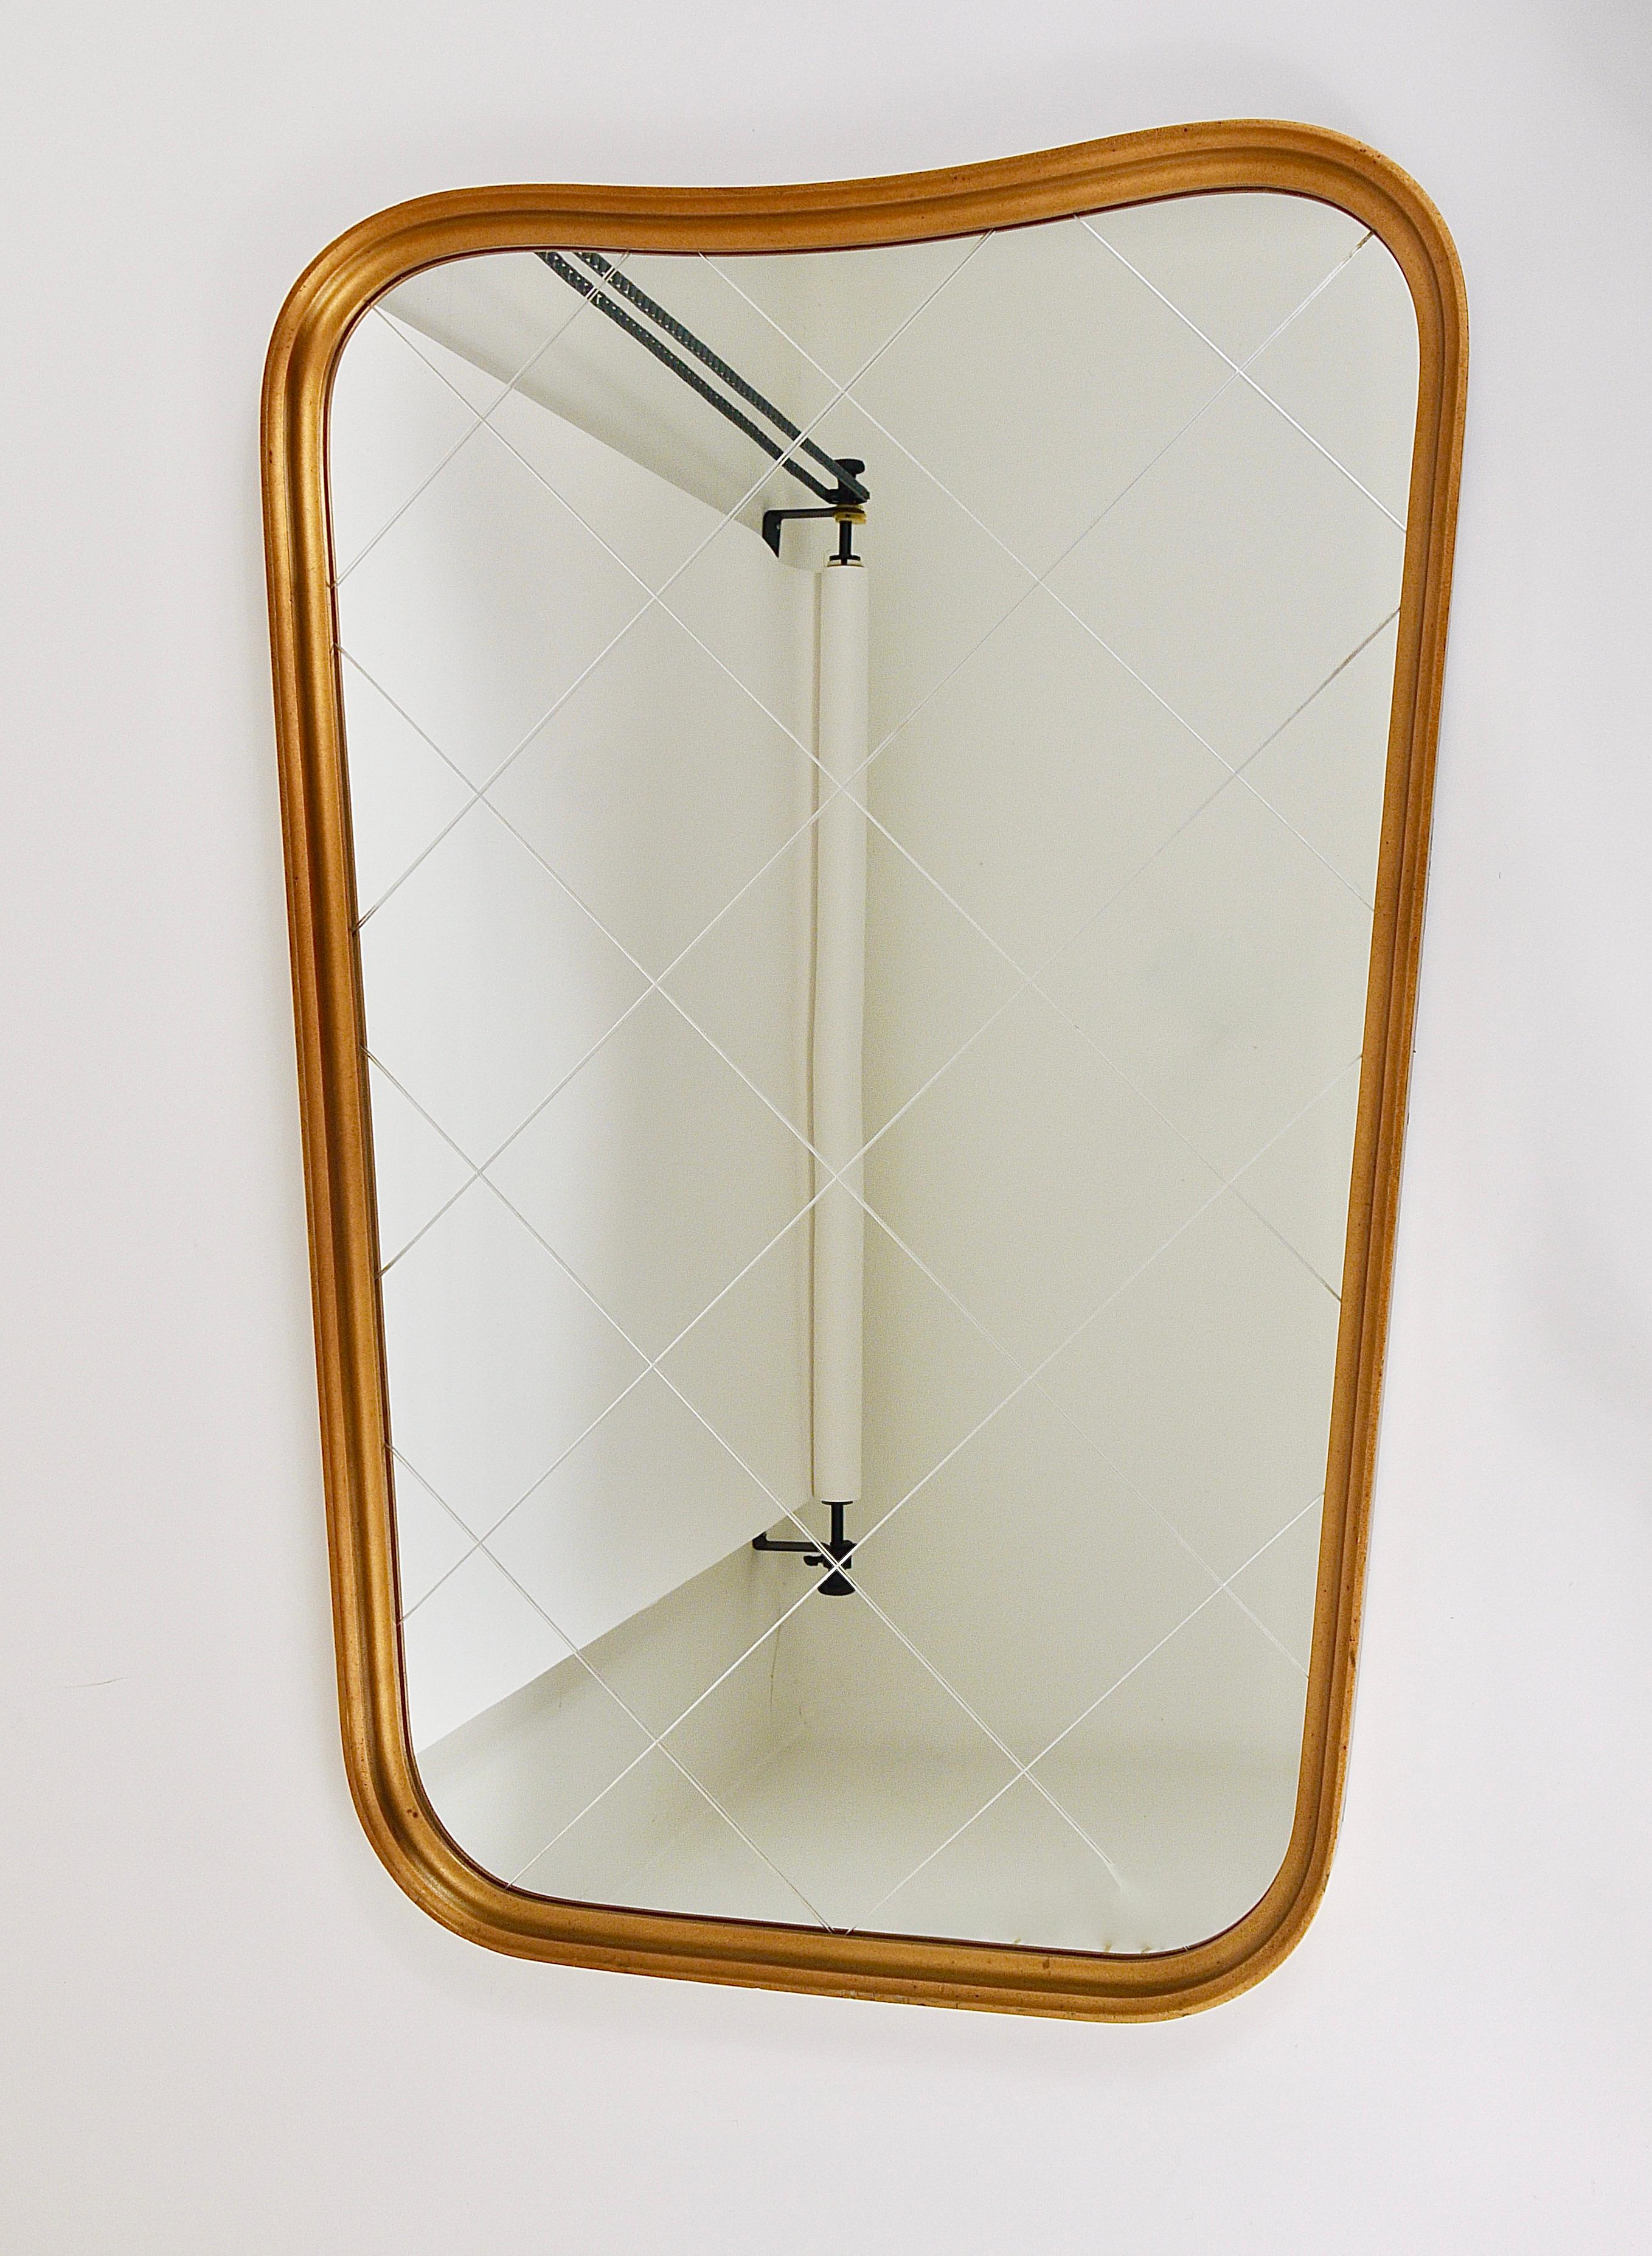 Large Mid-Century Golden Wall Mirror with Faceted Check Pattern, Austria, 1950s For Sale 4